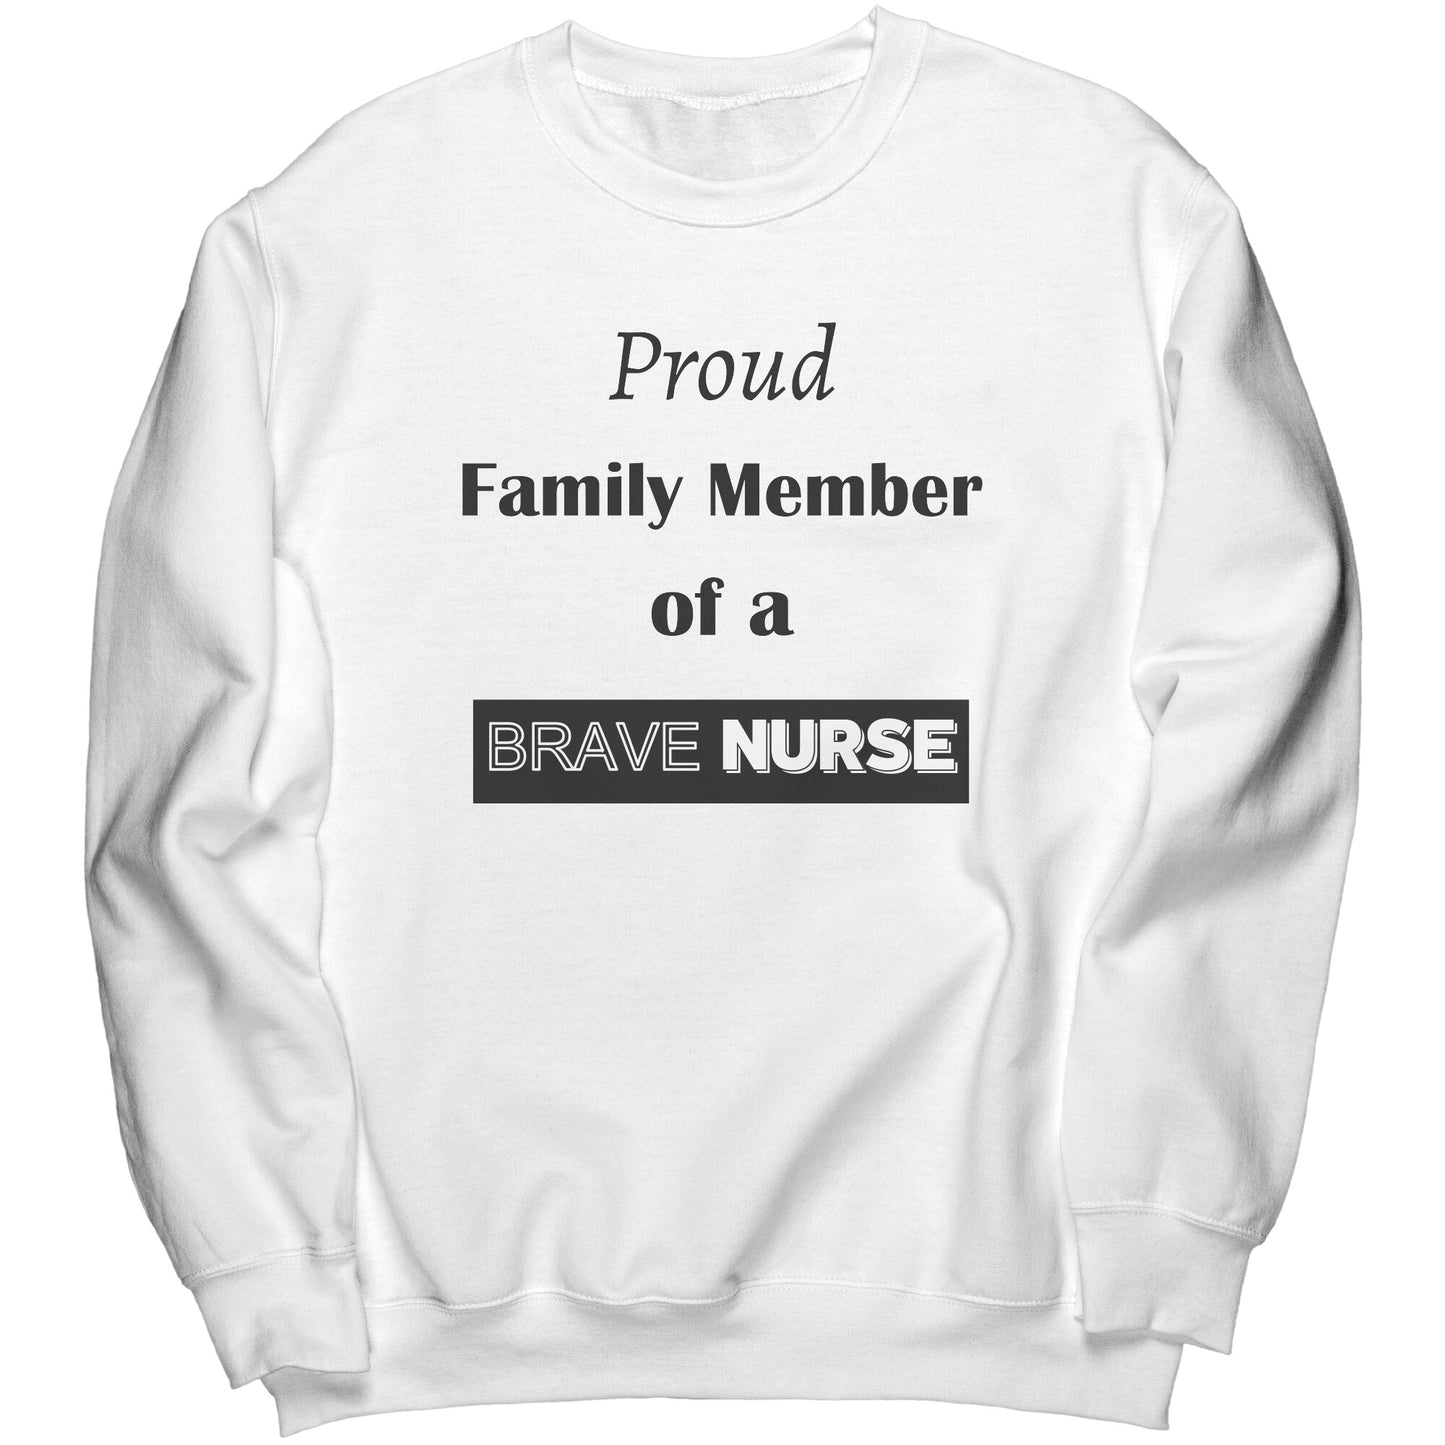 Proud Family Member of a Brave Nurse Lettering Sweatshirt - Signs and Seasons Gifts